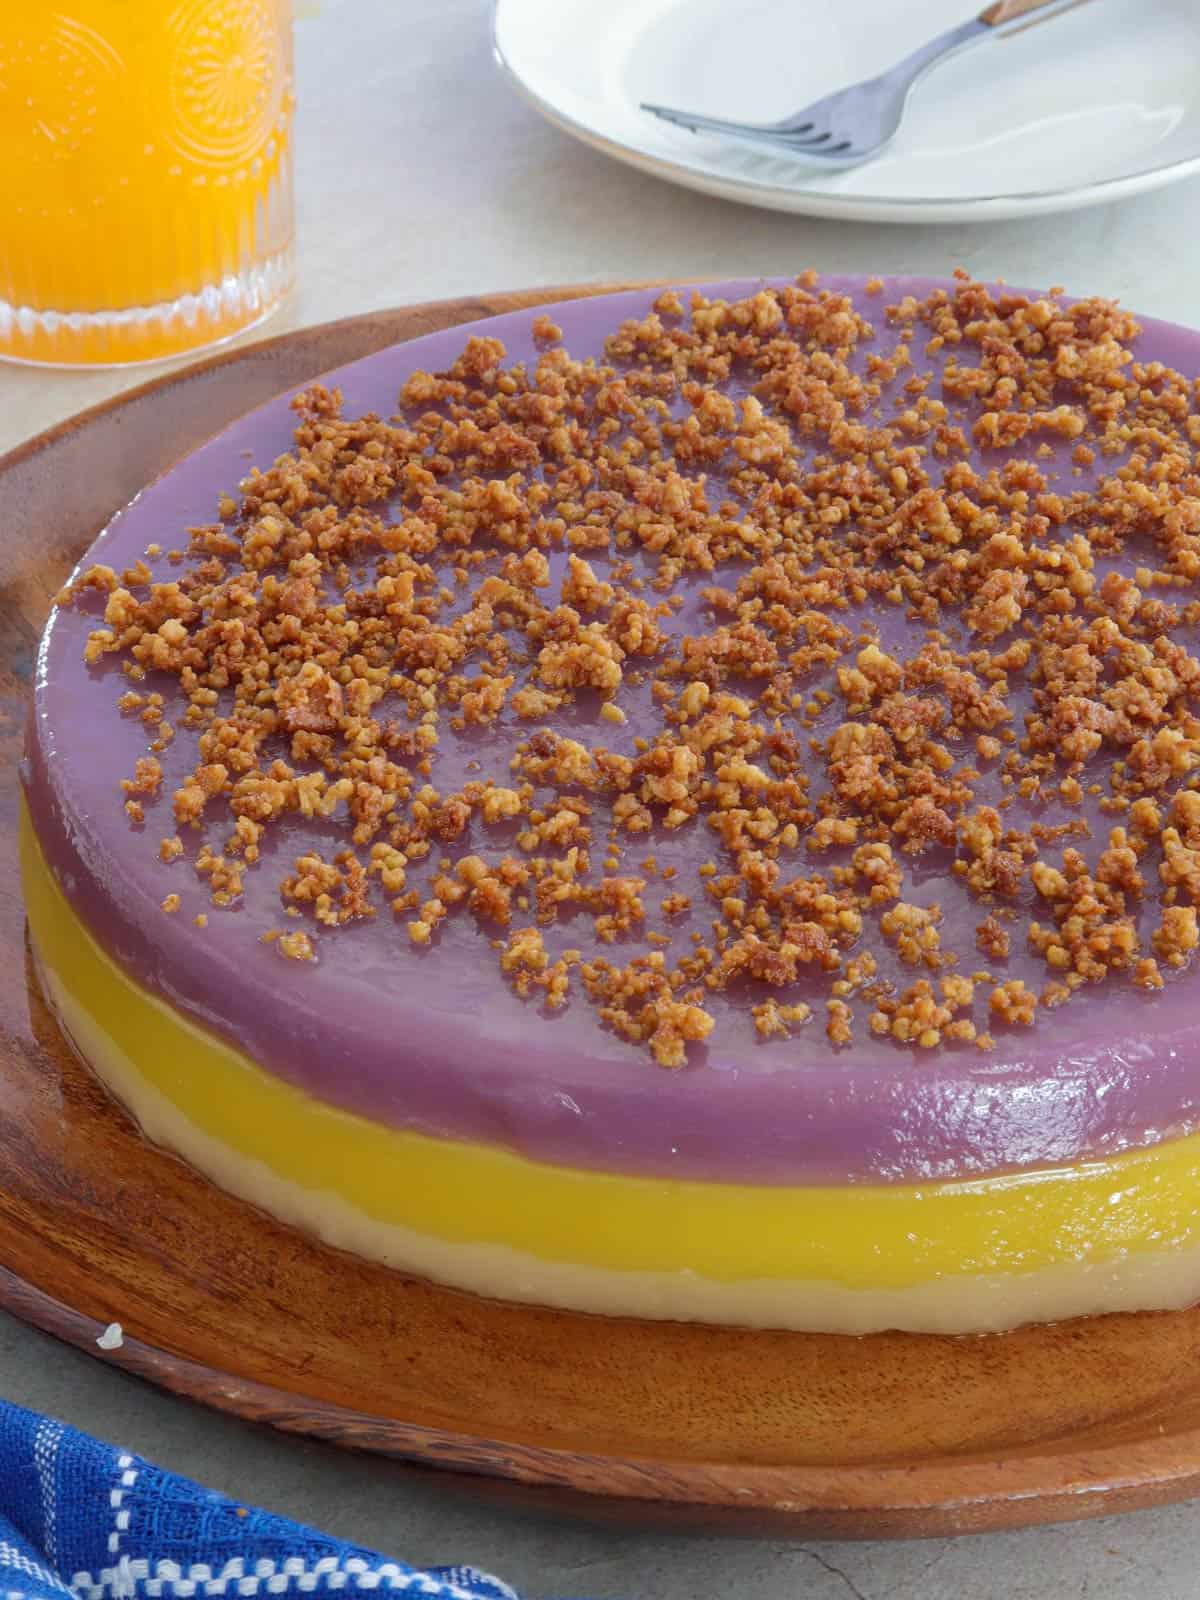 Sapin Sapin with latik topping on a wooden plate